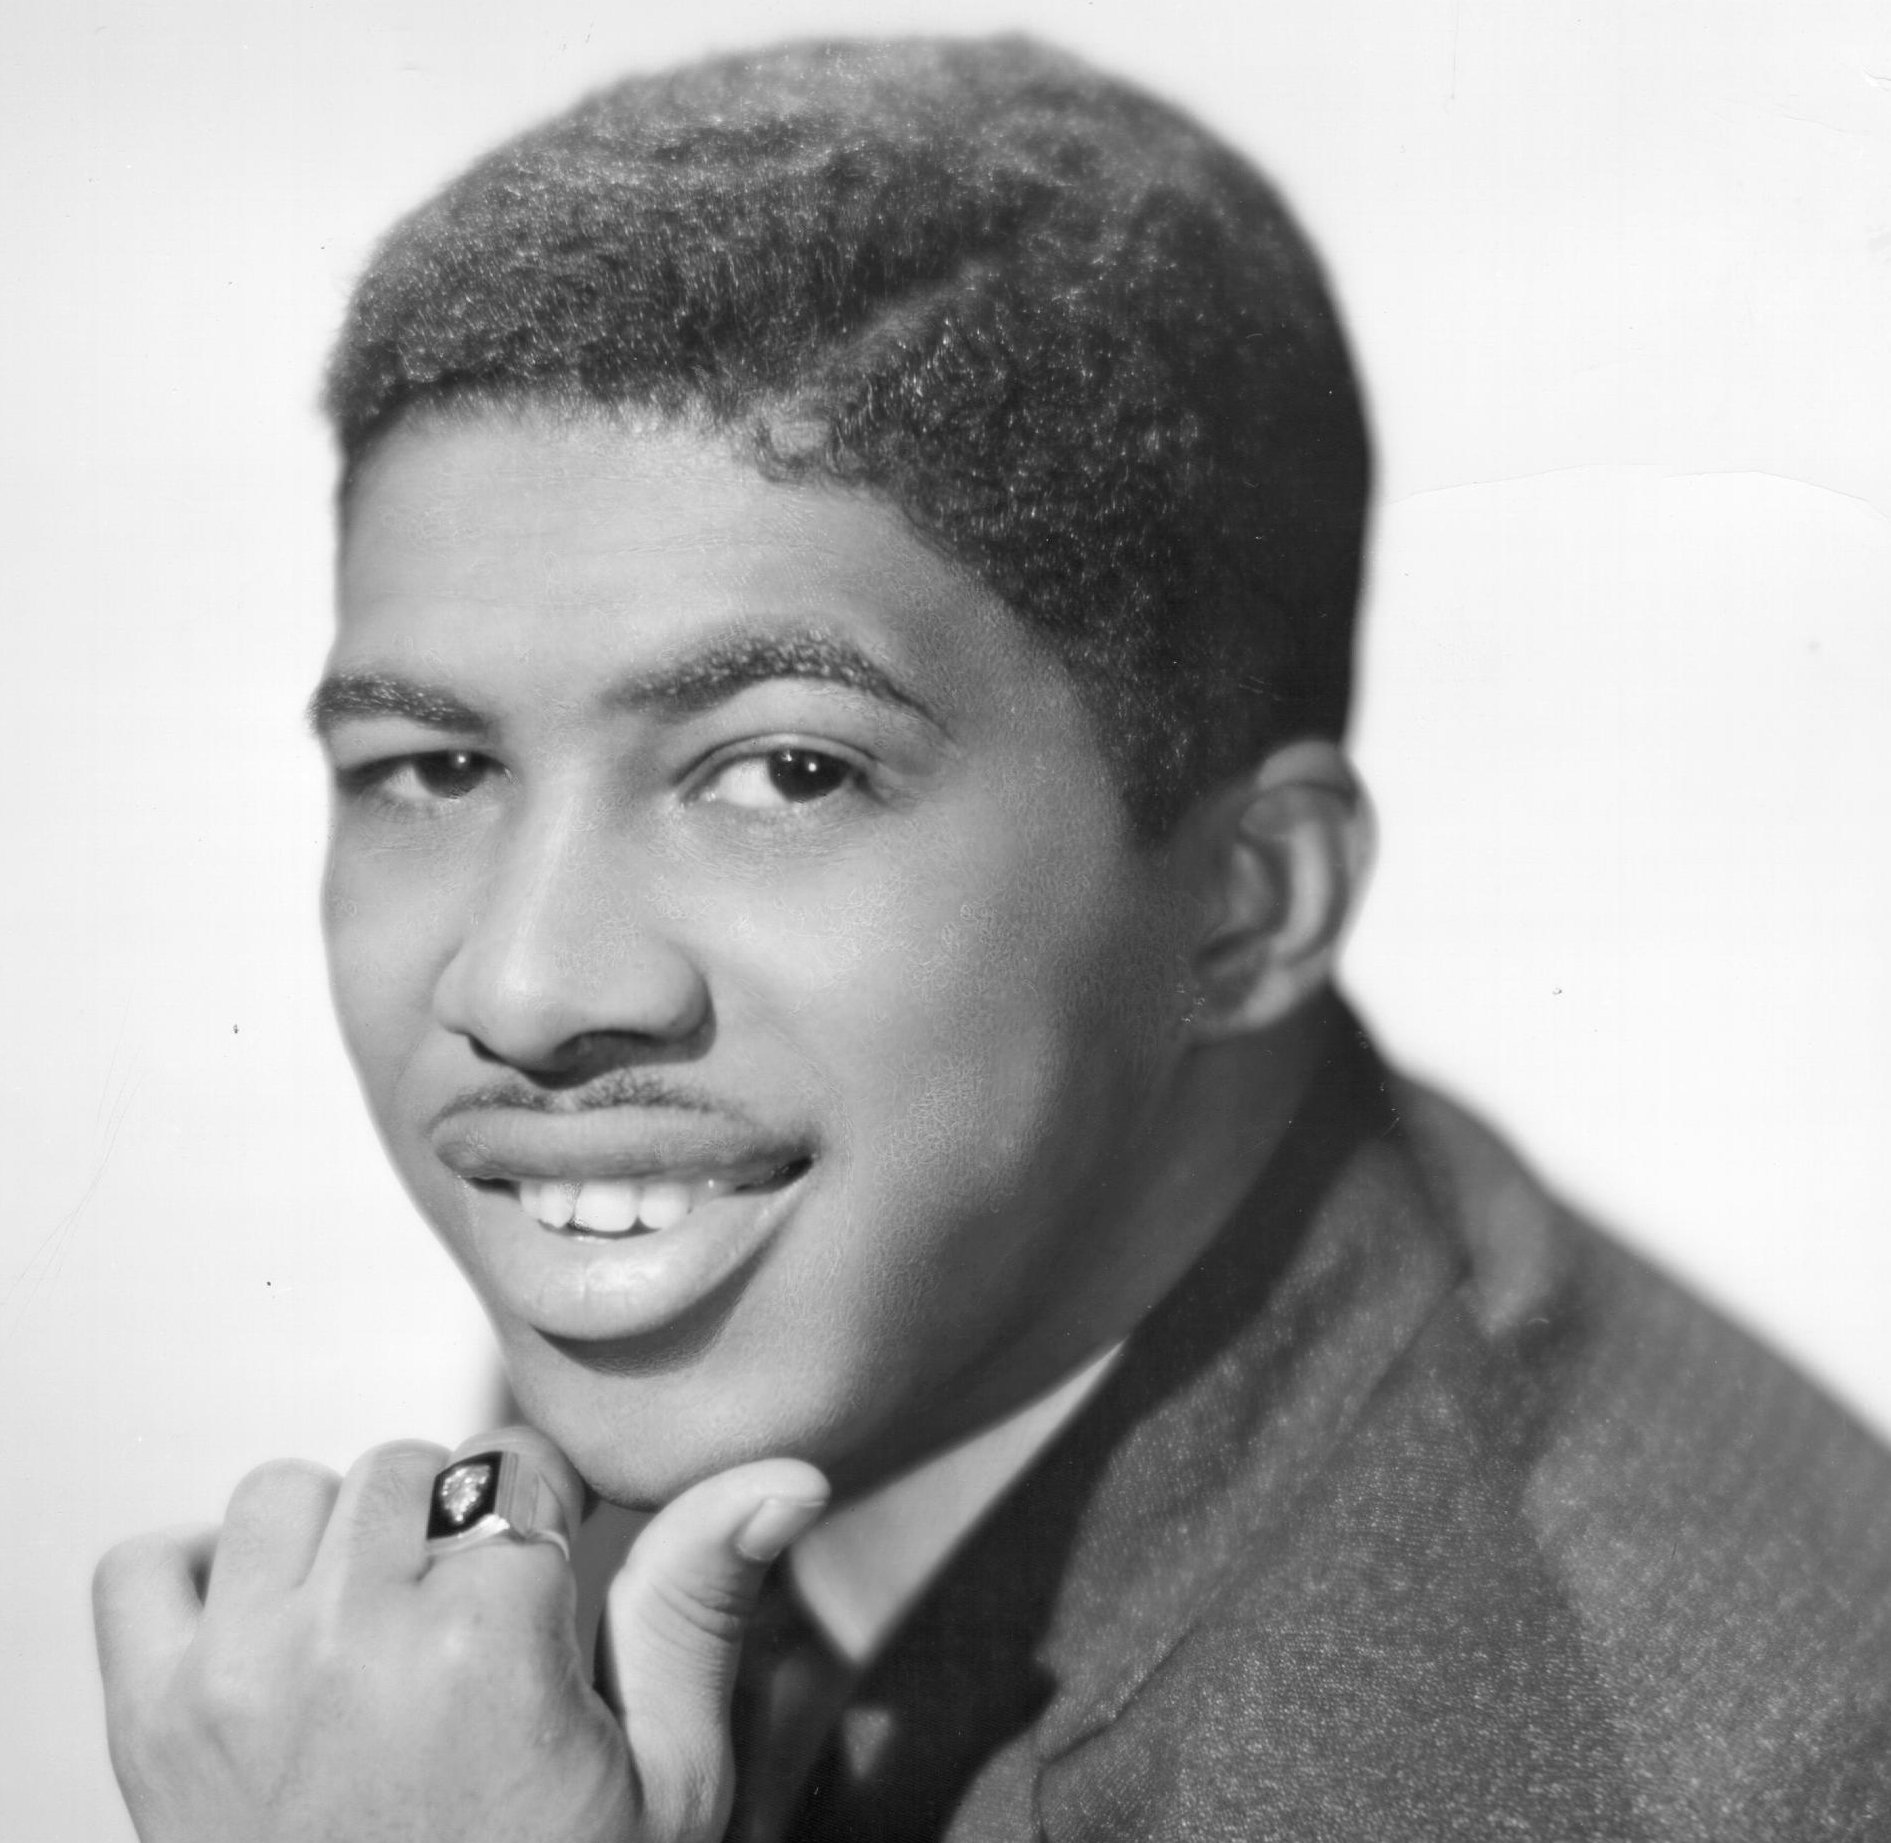 "Stand By Me" singer Ben E. King wearing a ring